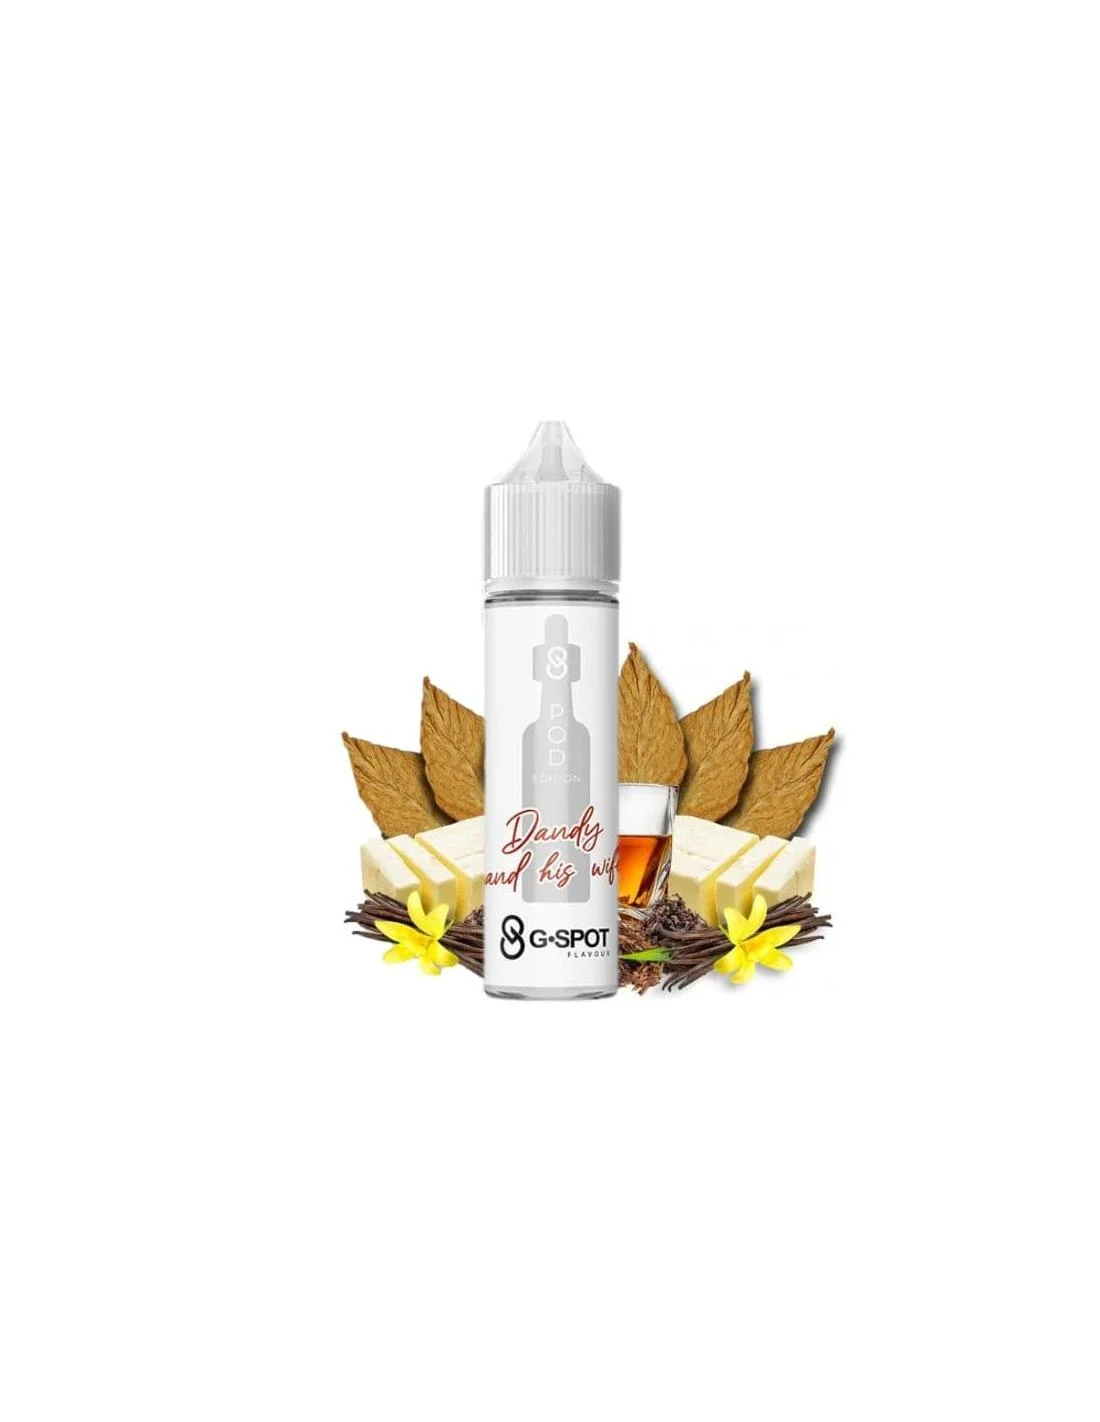 dandy-and-his-wife-pod-edition-20-ml